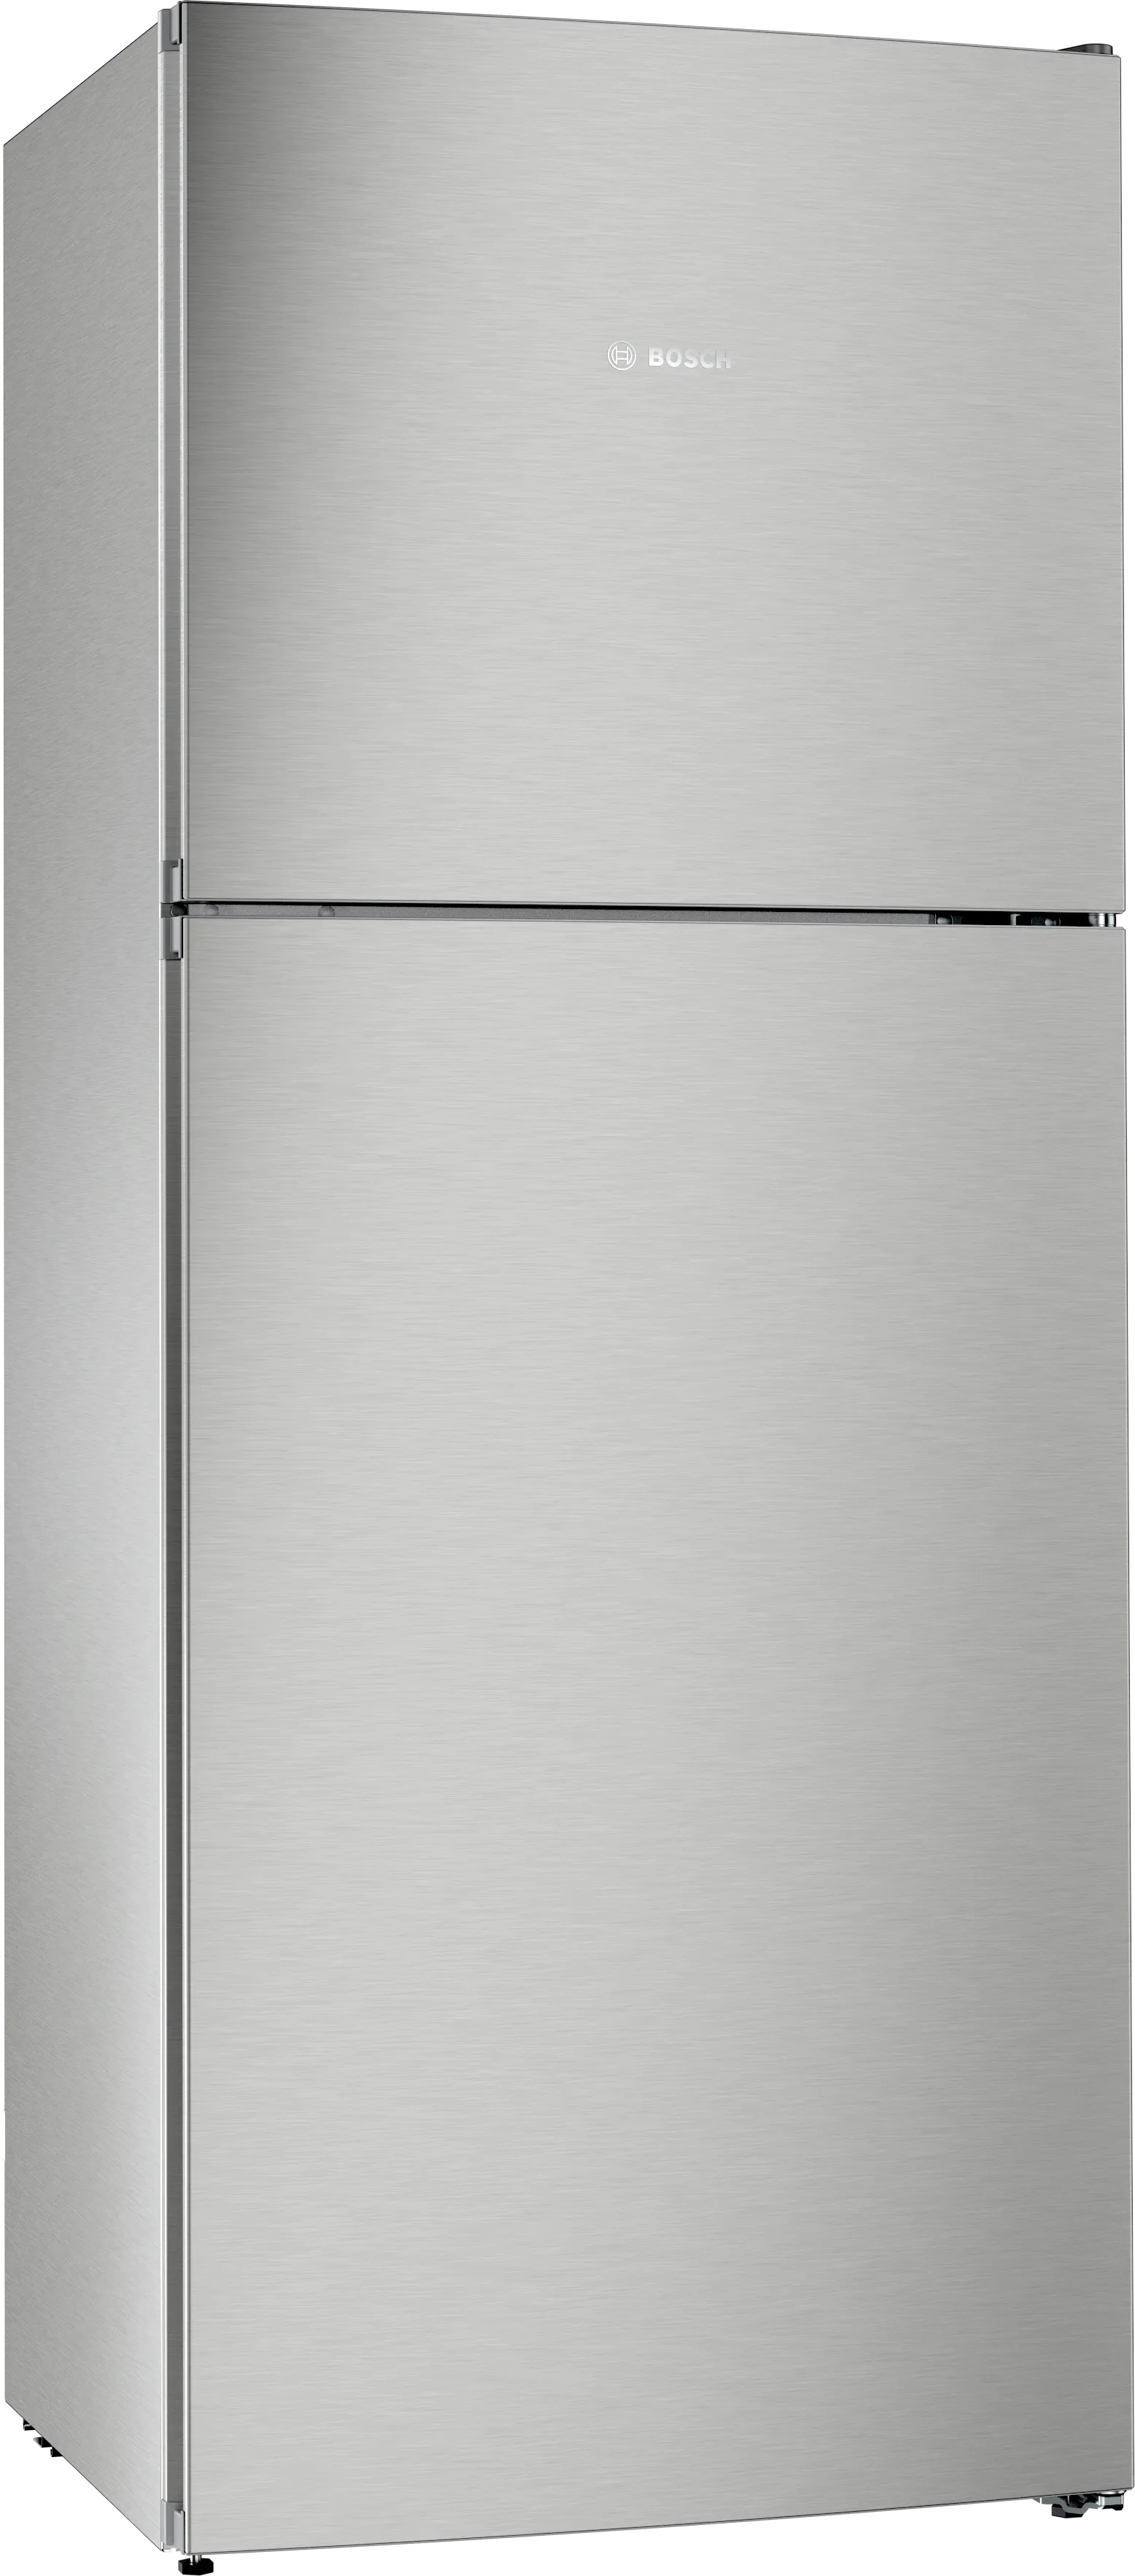 Series 2 free-standing fridge-freezer with freezer at top 178 x 70 cm Stainless steel look 